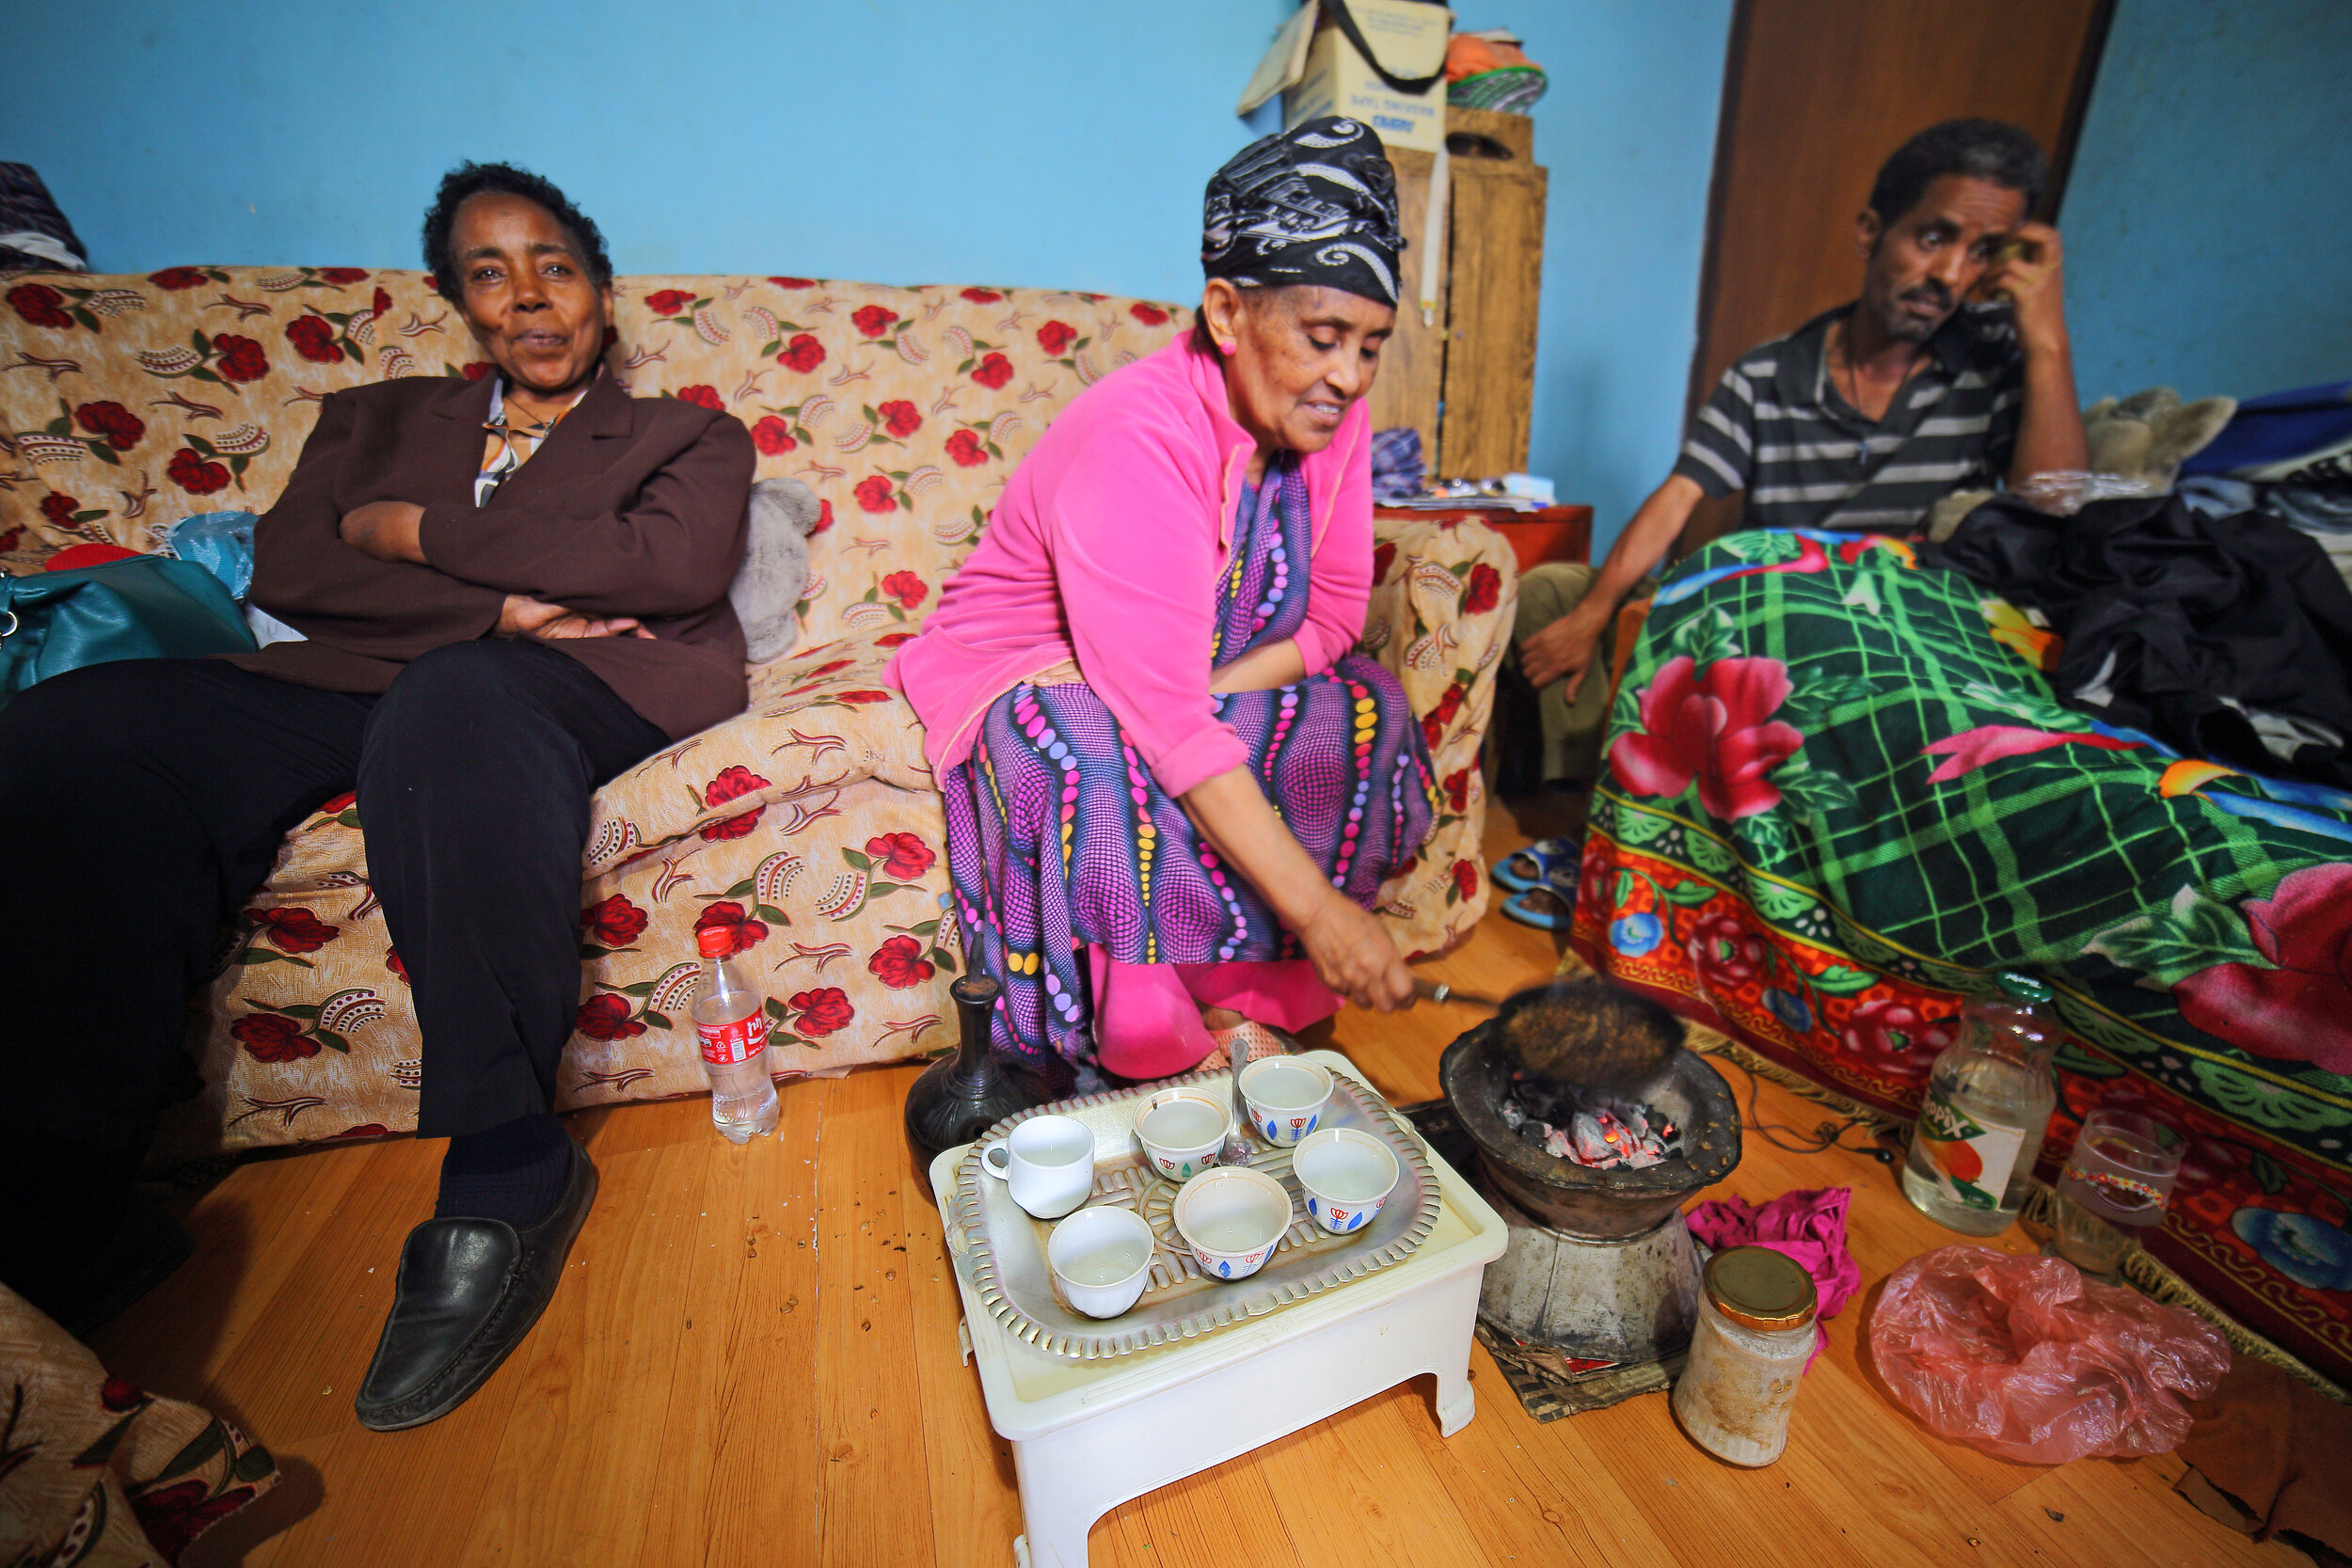  This family received a condominium because they were relocated from a redevelopment area in the center of Addis. This picture shows the importance of social interaction in Ethiopia, especially the “coffee ceremony,” to connect with other people, be 